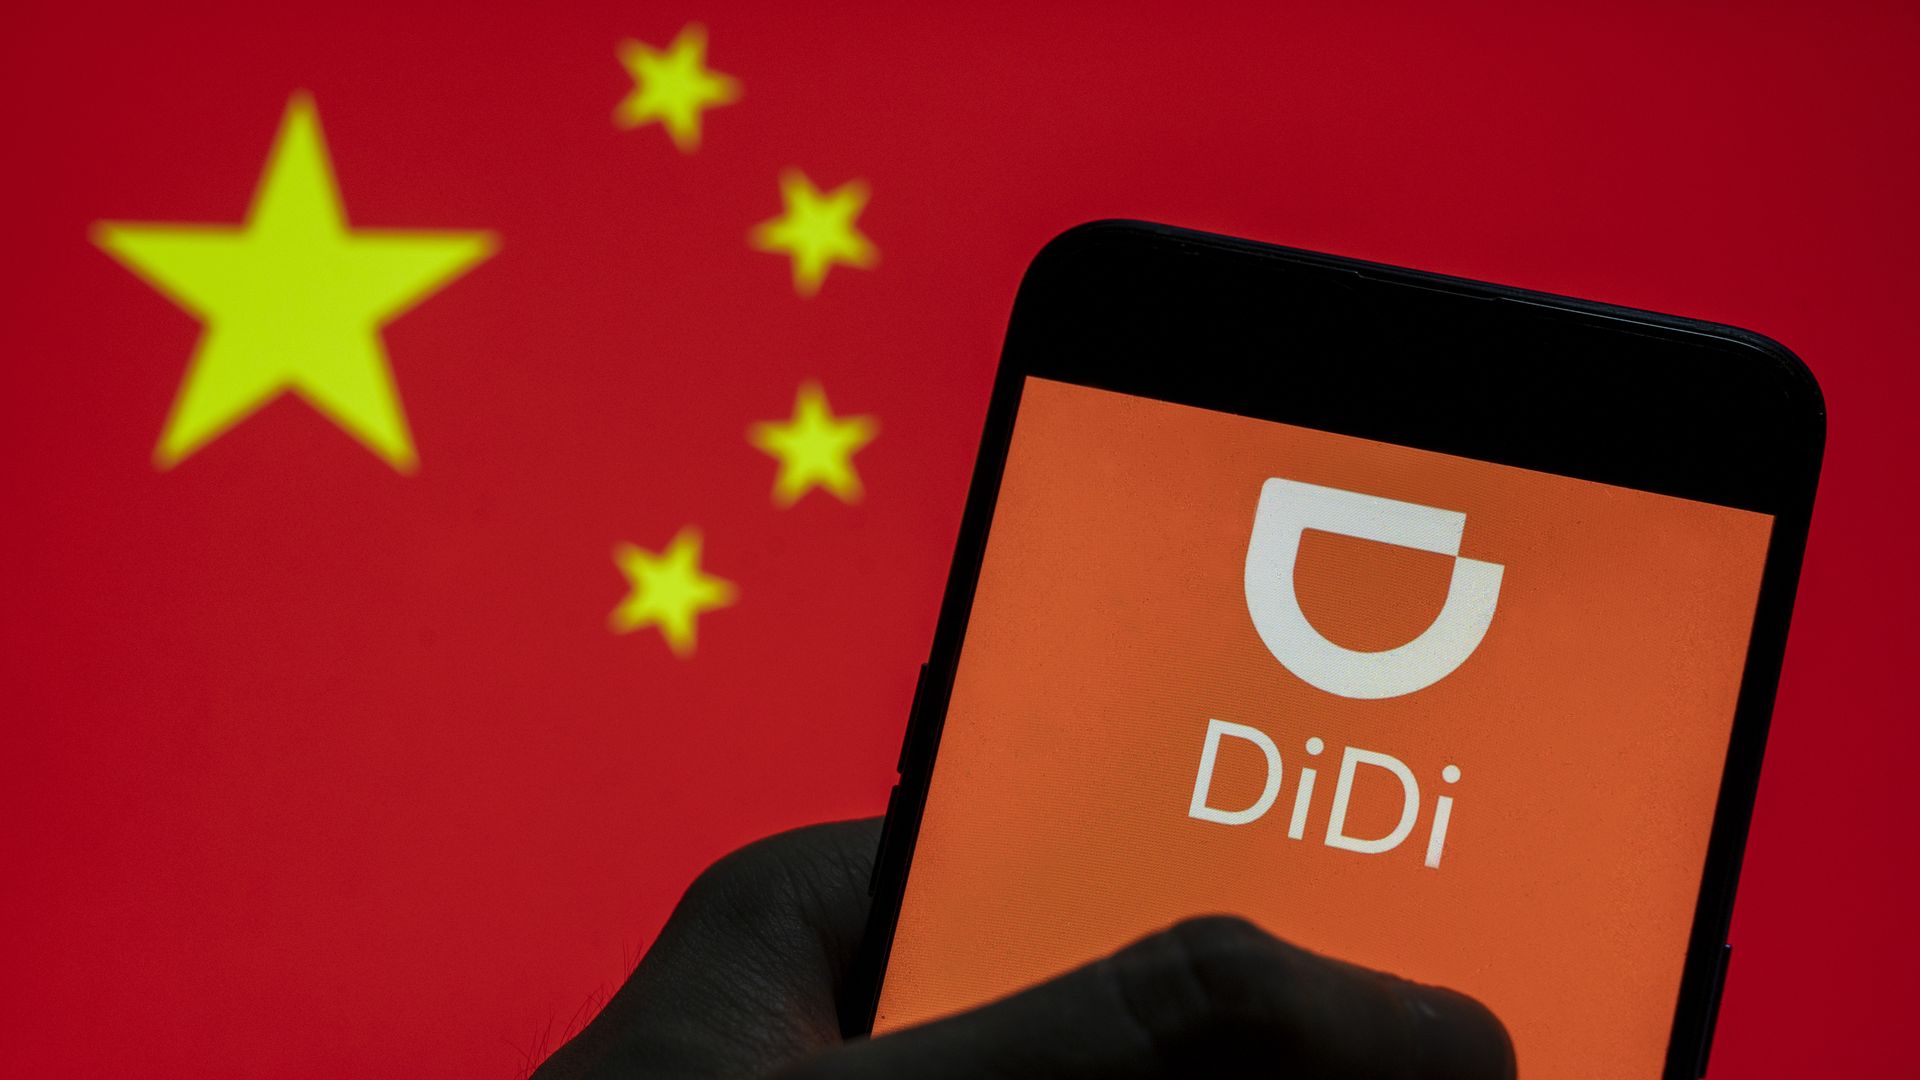 Picture of a hand holding a smartphone displaying the DiDi logo with a Chinese flag in the background